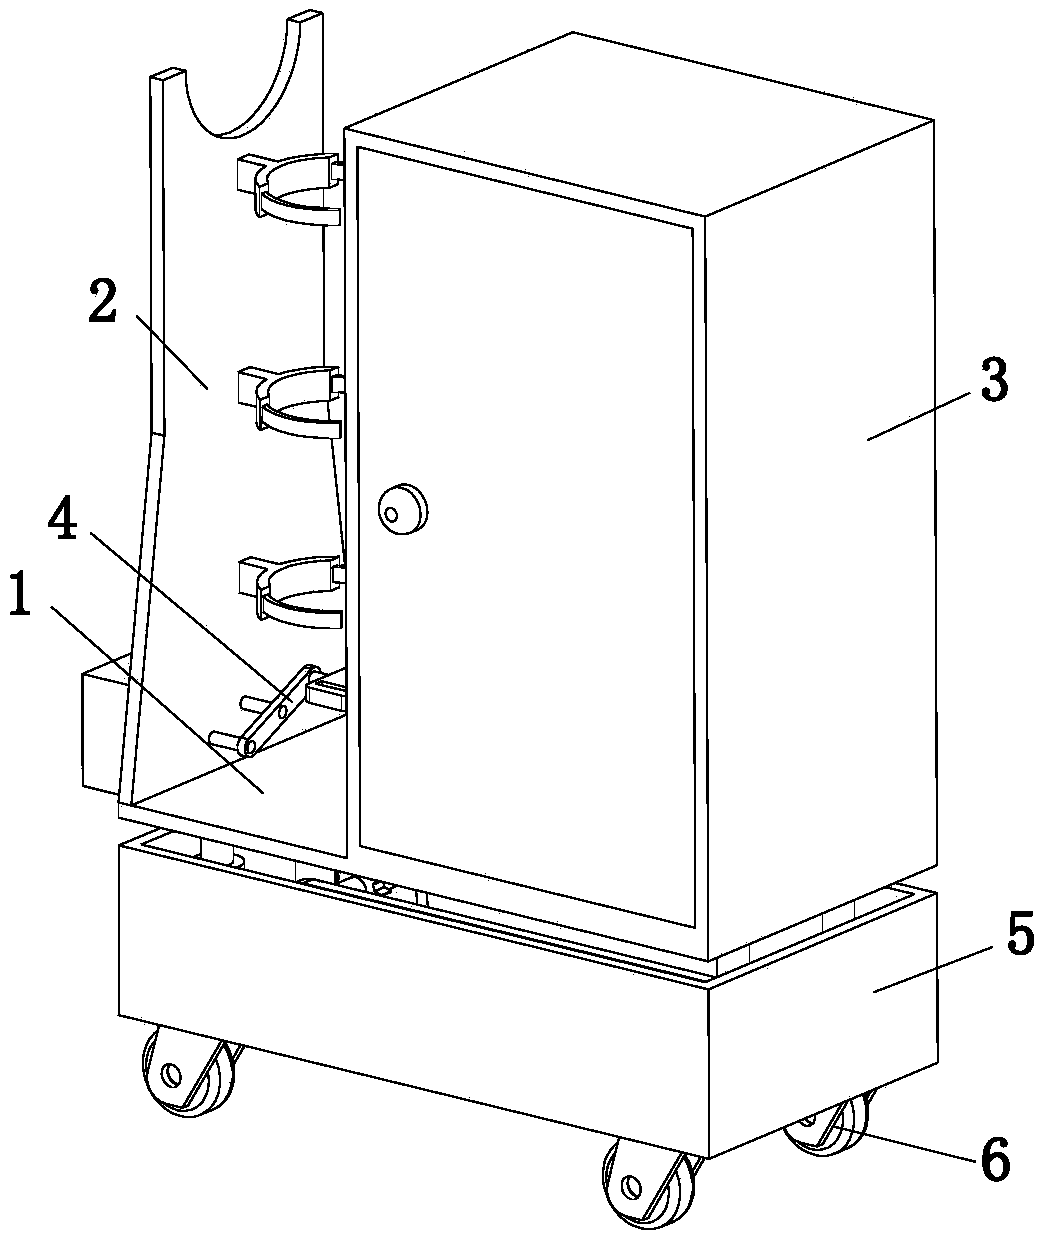 Operating method of medical foot correction training device